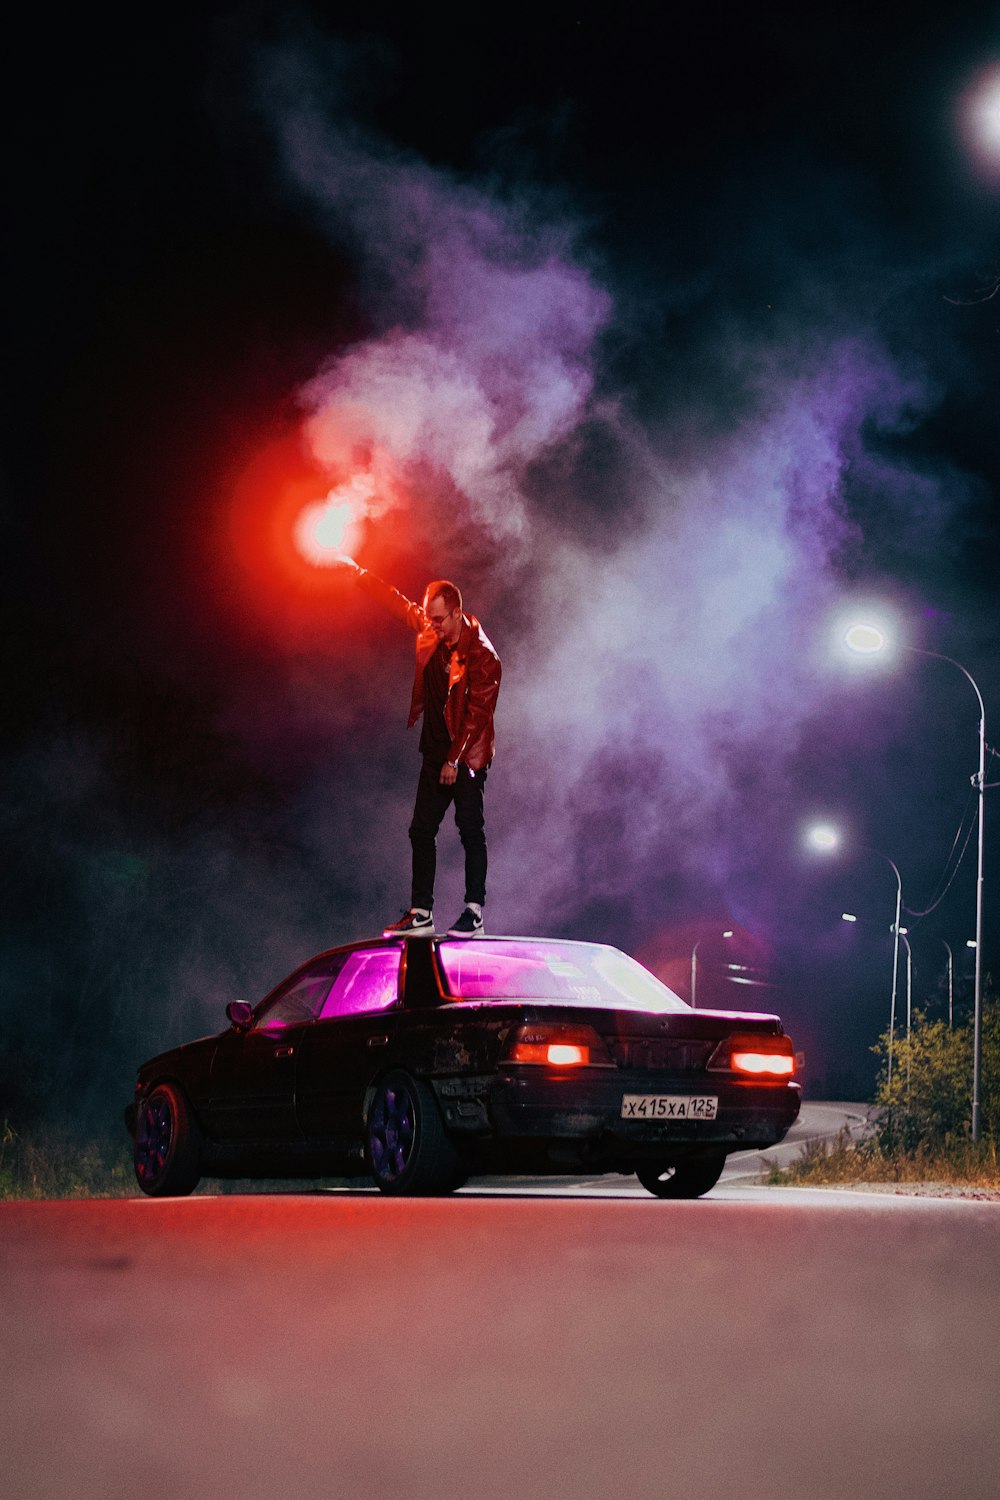 a person standing on the back of a car with a fire behind him